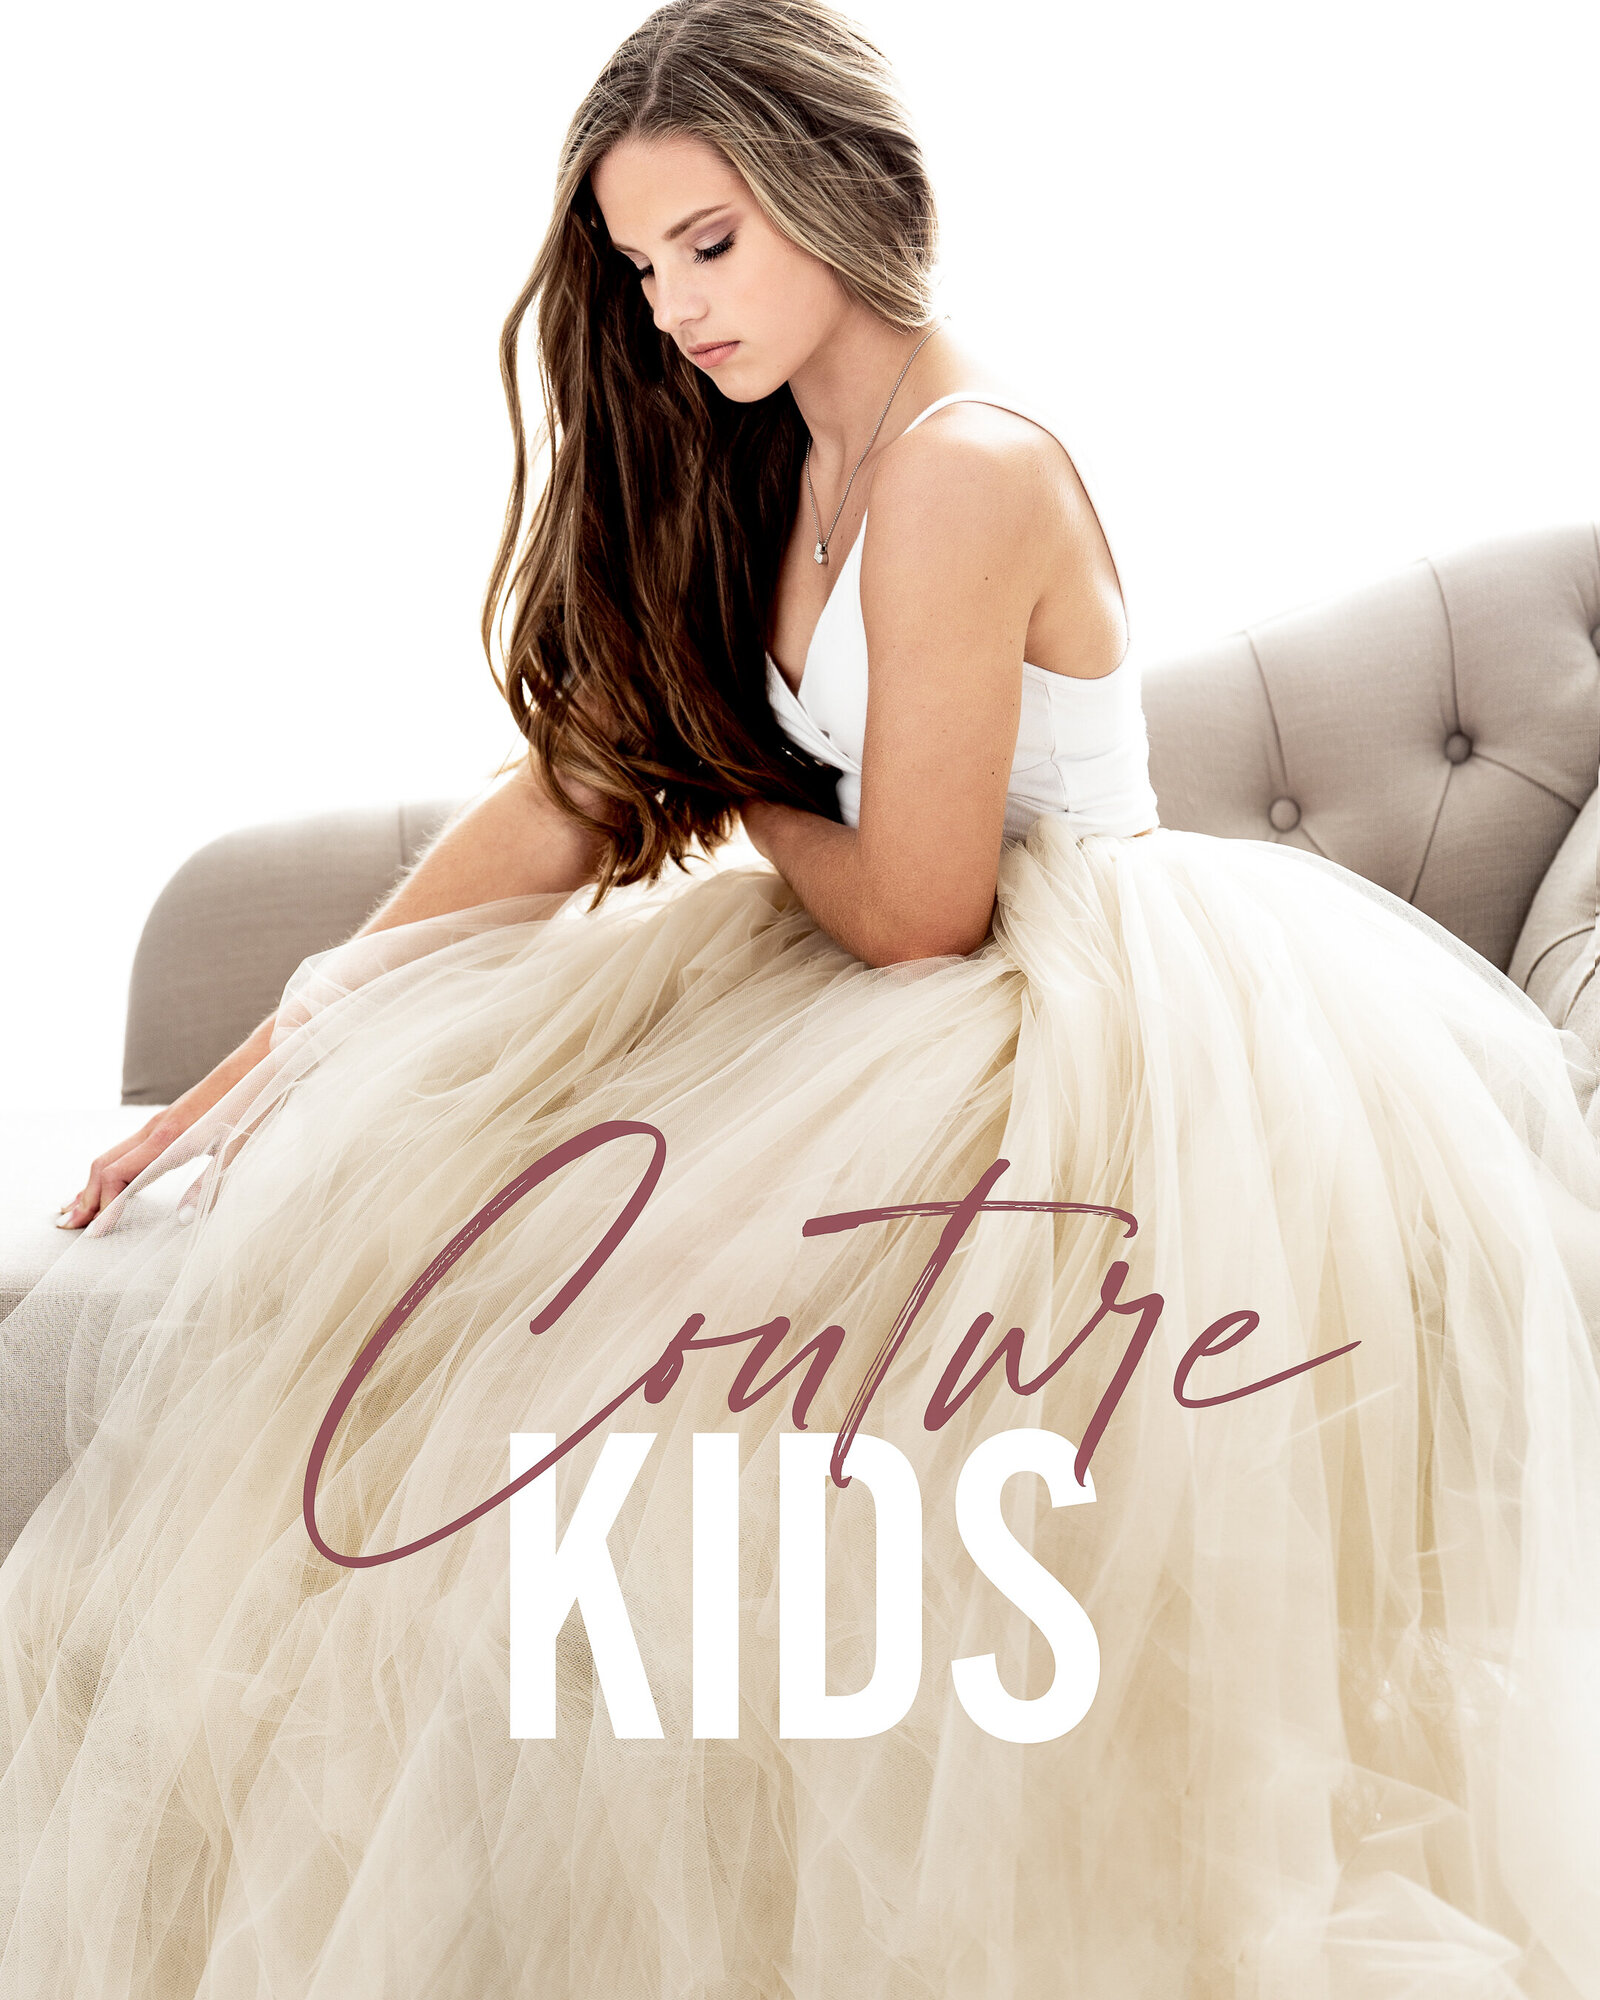 Kids_Couture-2